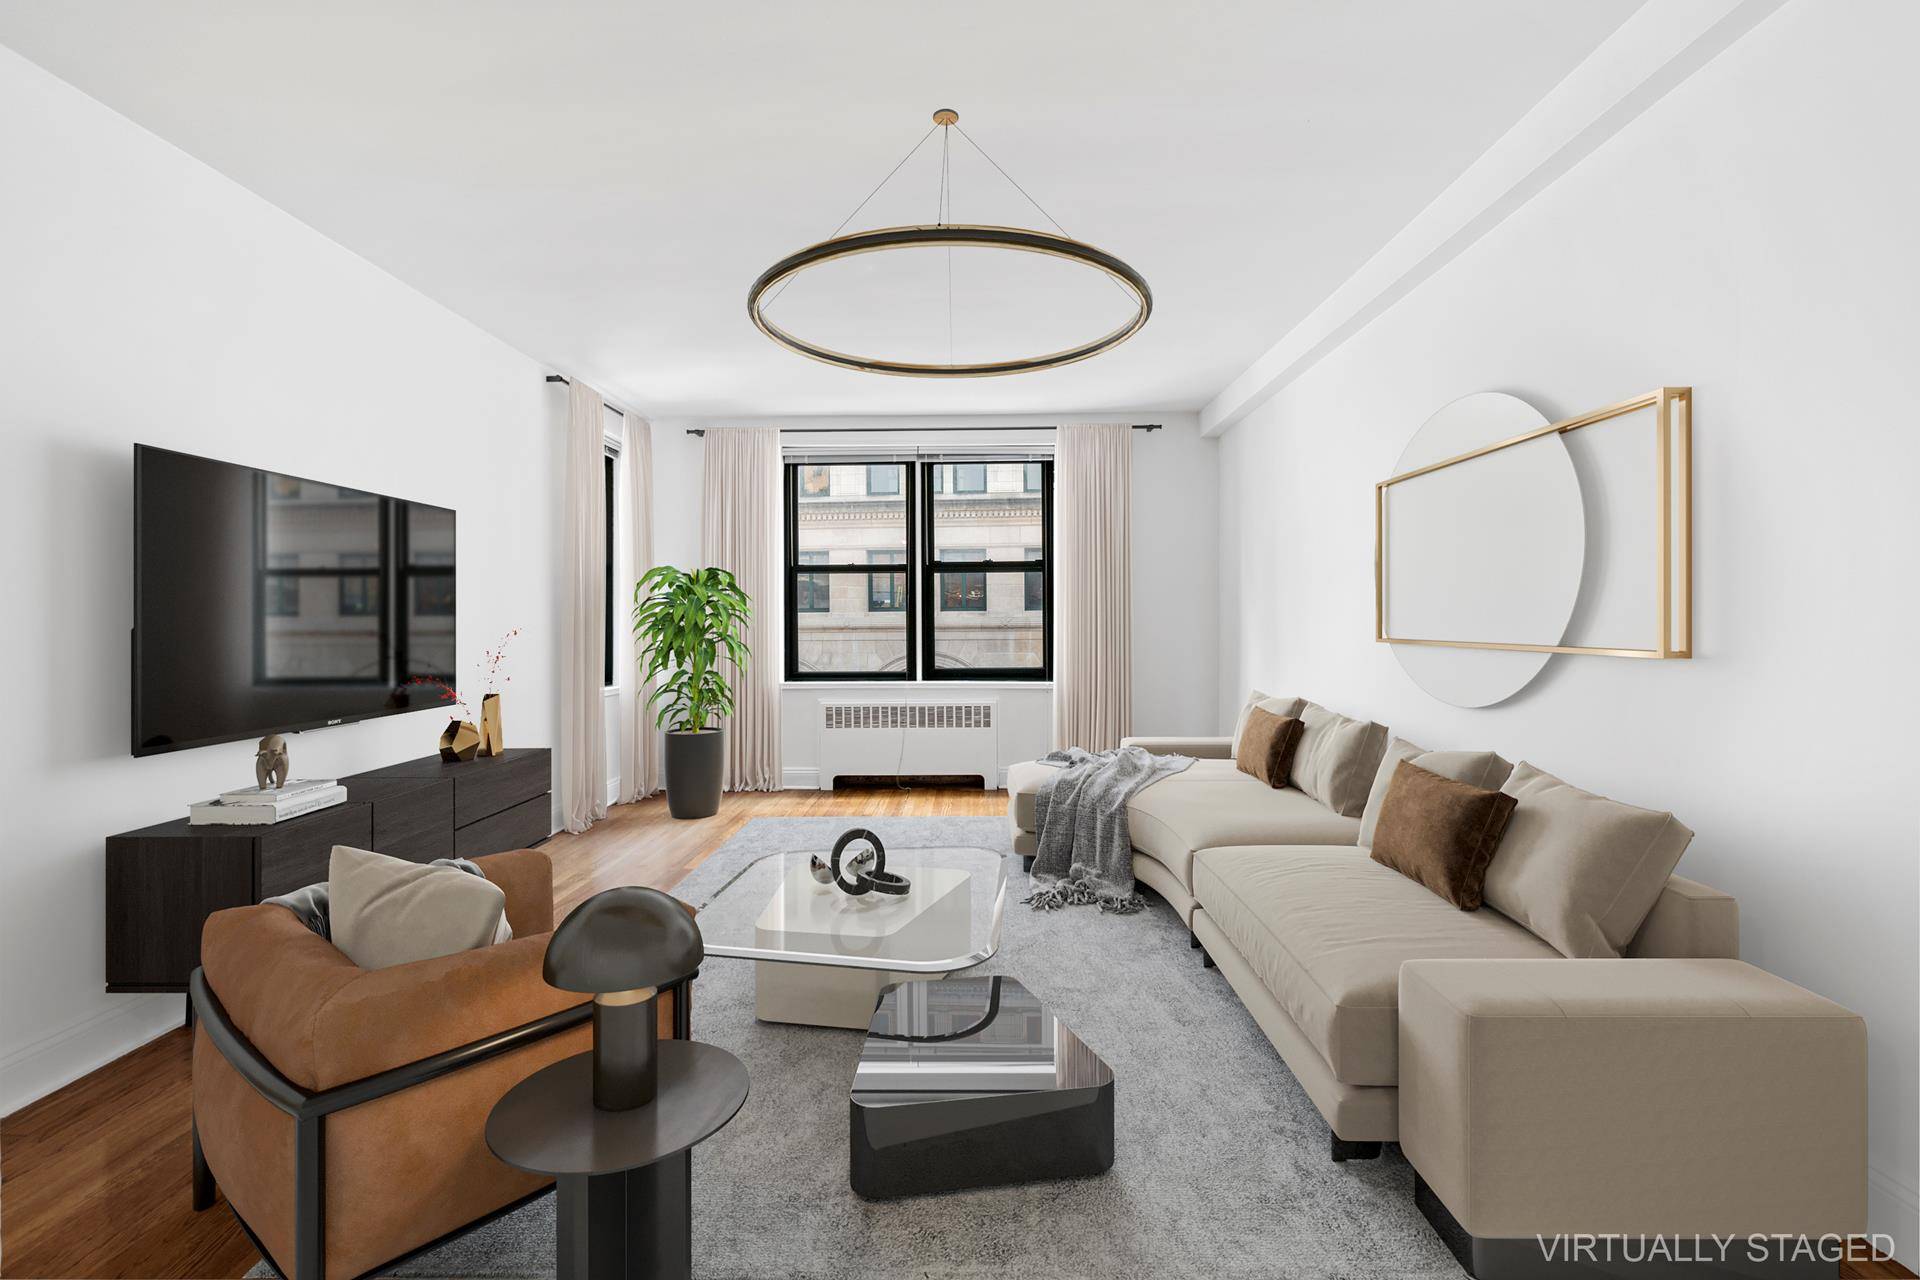 Priced to sell. Move right into this spacious one bedroom, one bathroom home nestled on one of the most desirable blocks in Greenwich Village.